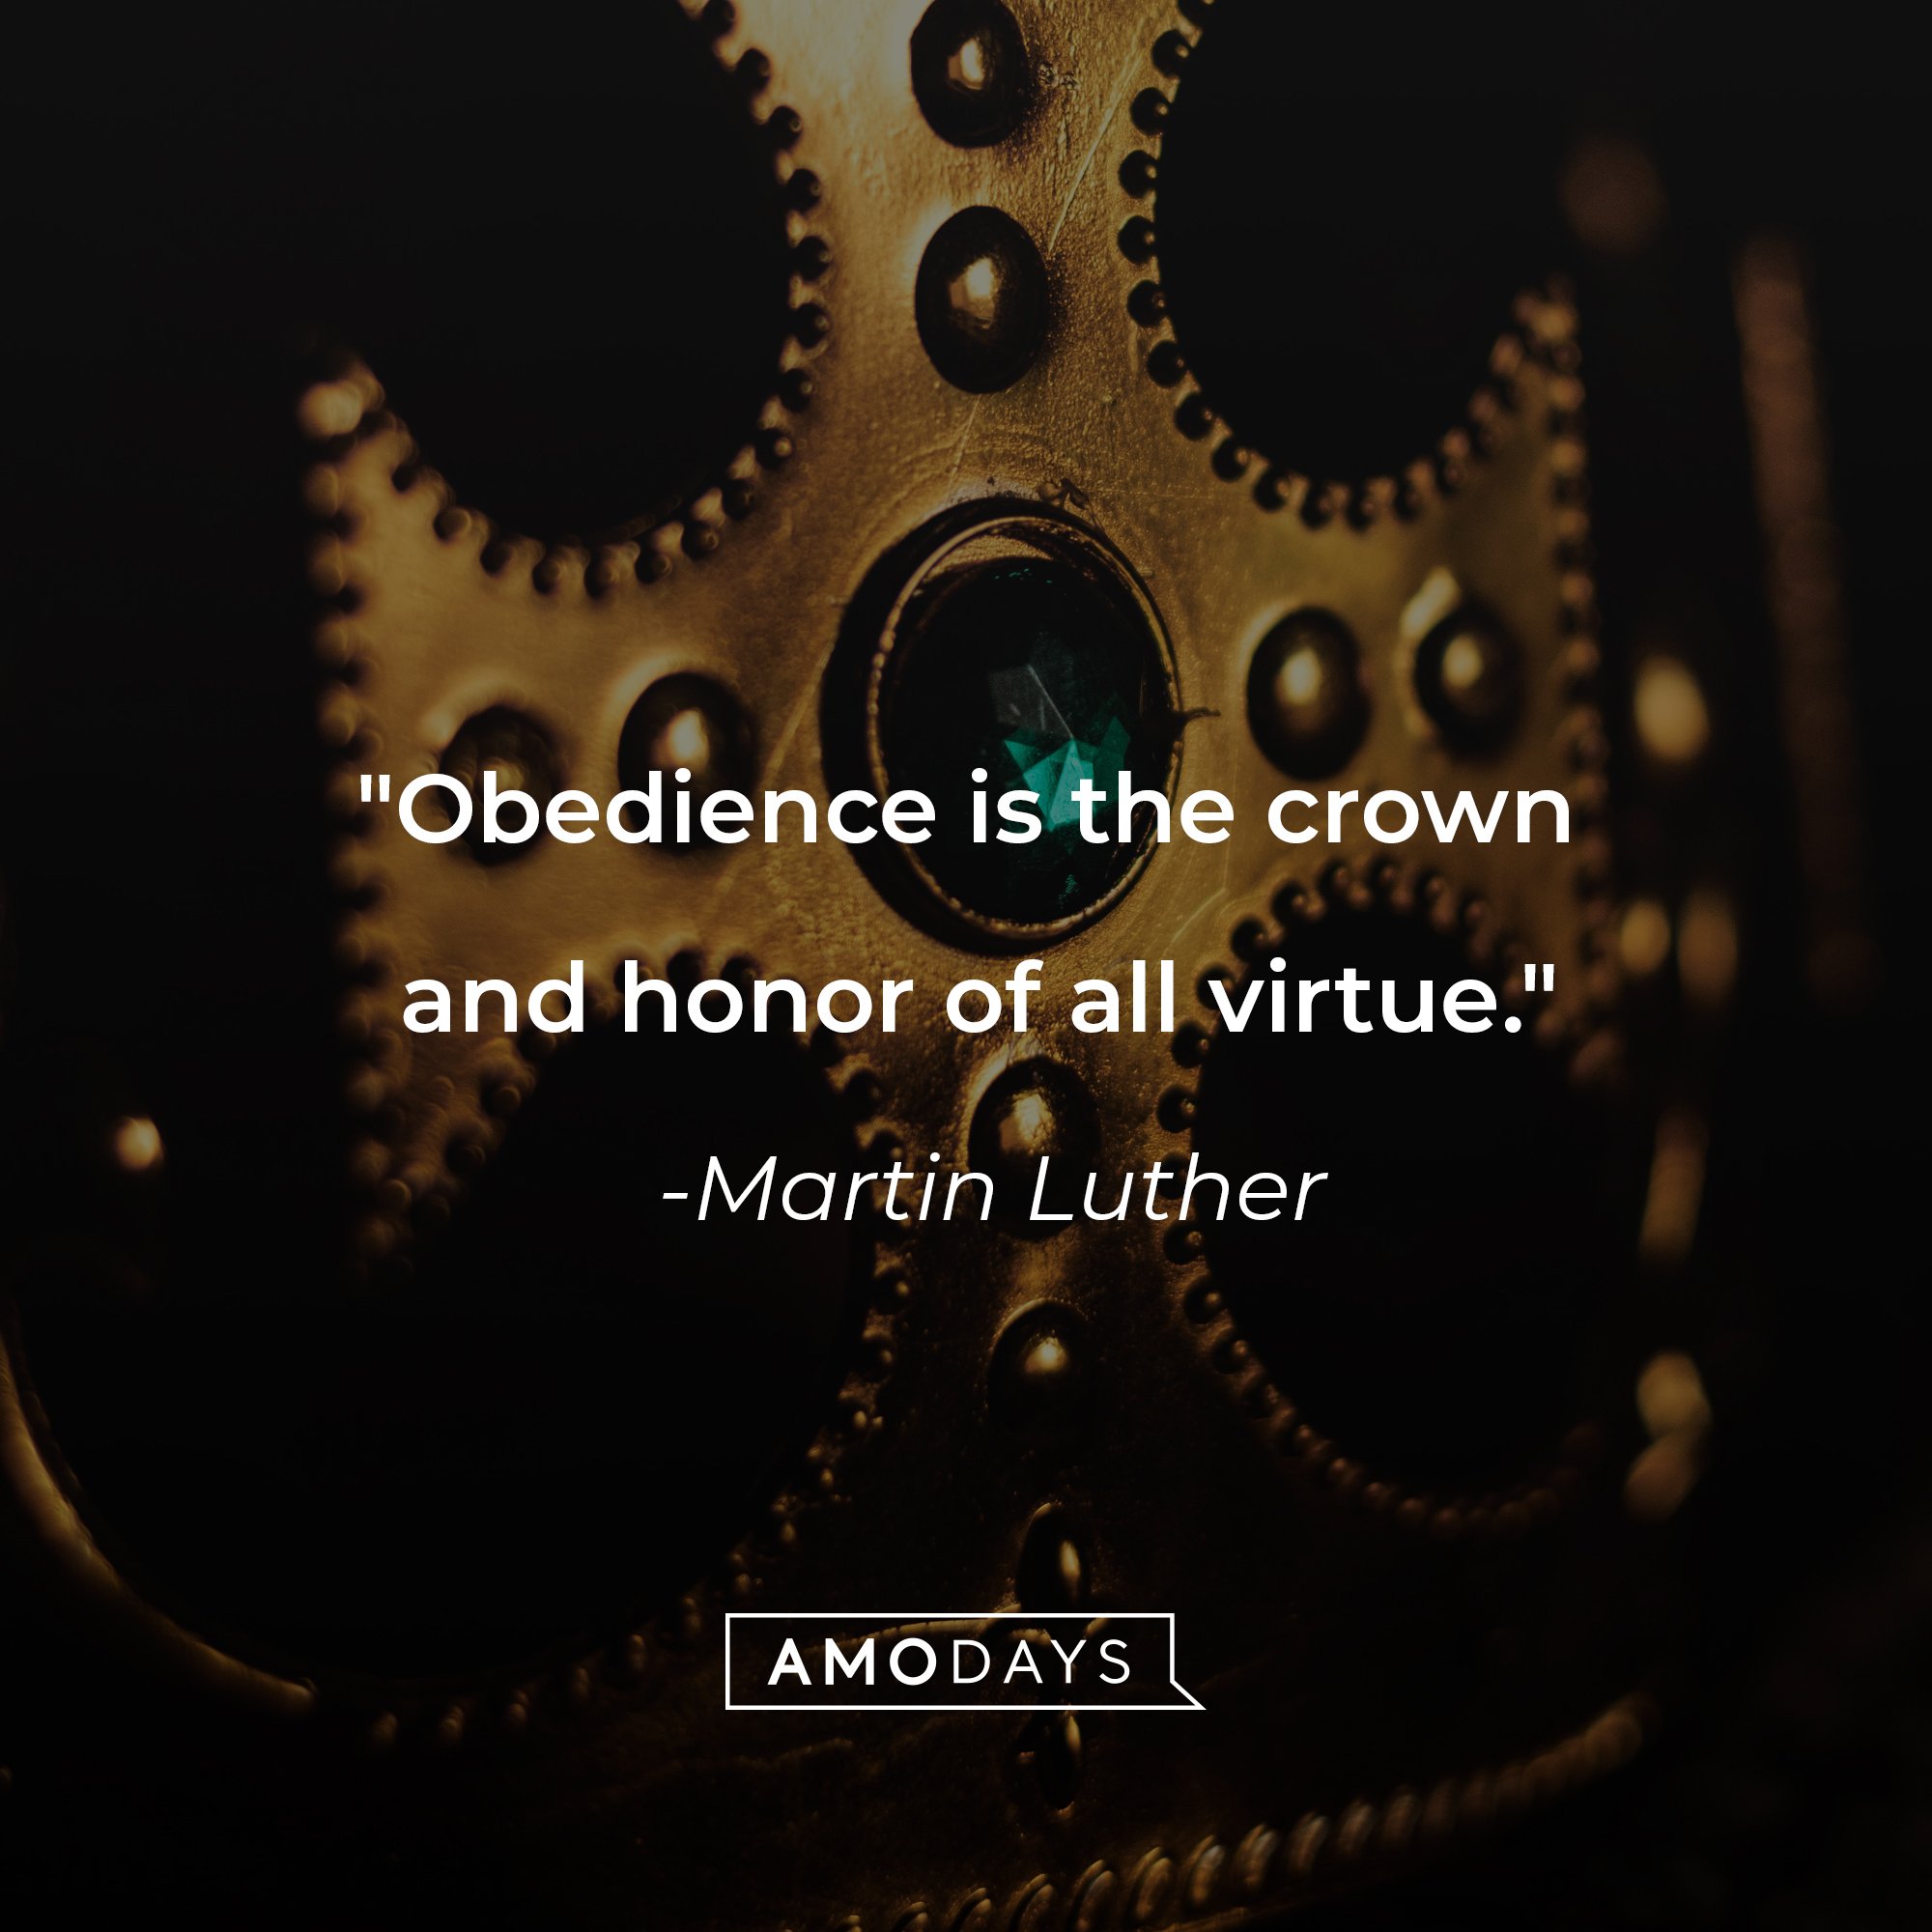 Martin Luther's quote: "Obedience is the crown and honor of all virtue." | Image: AmoDays